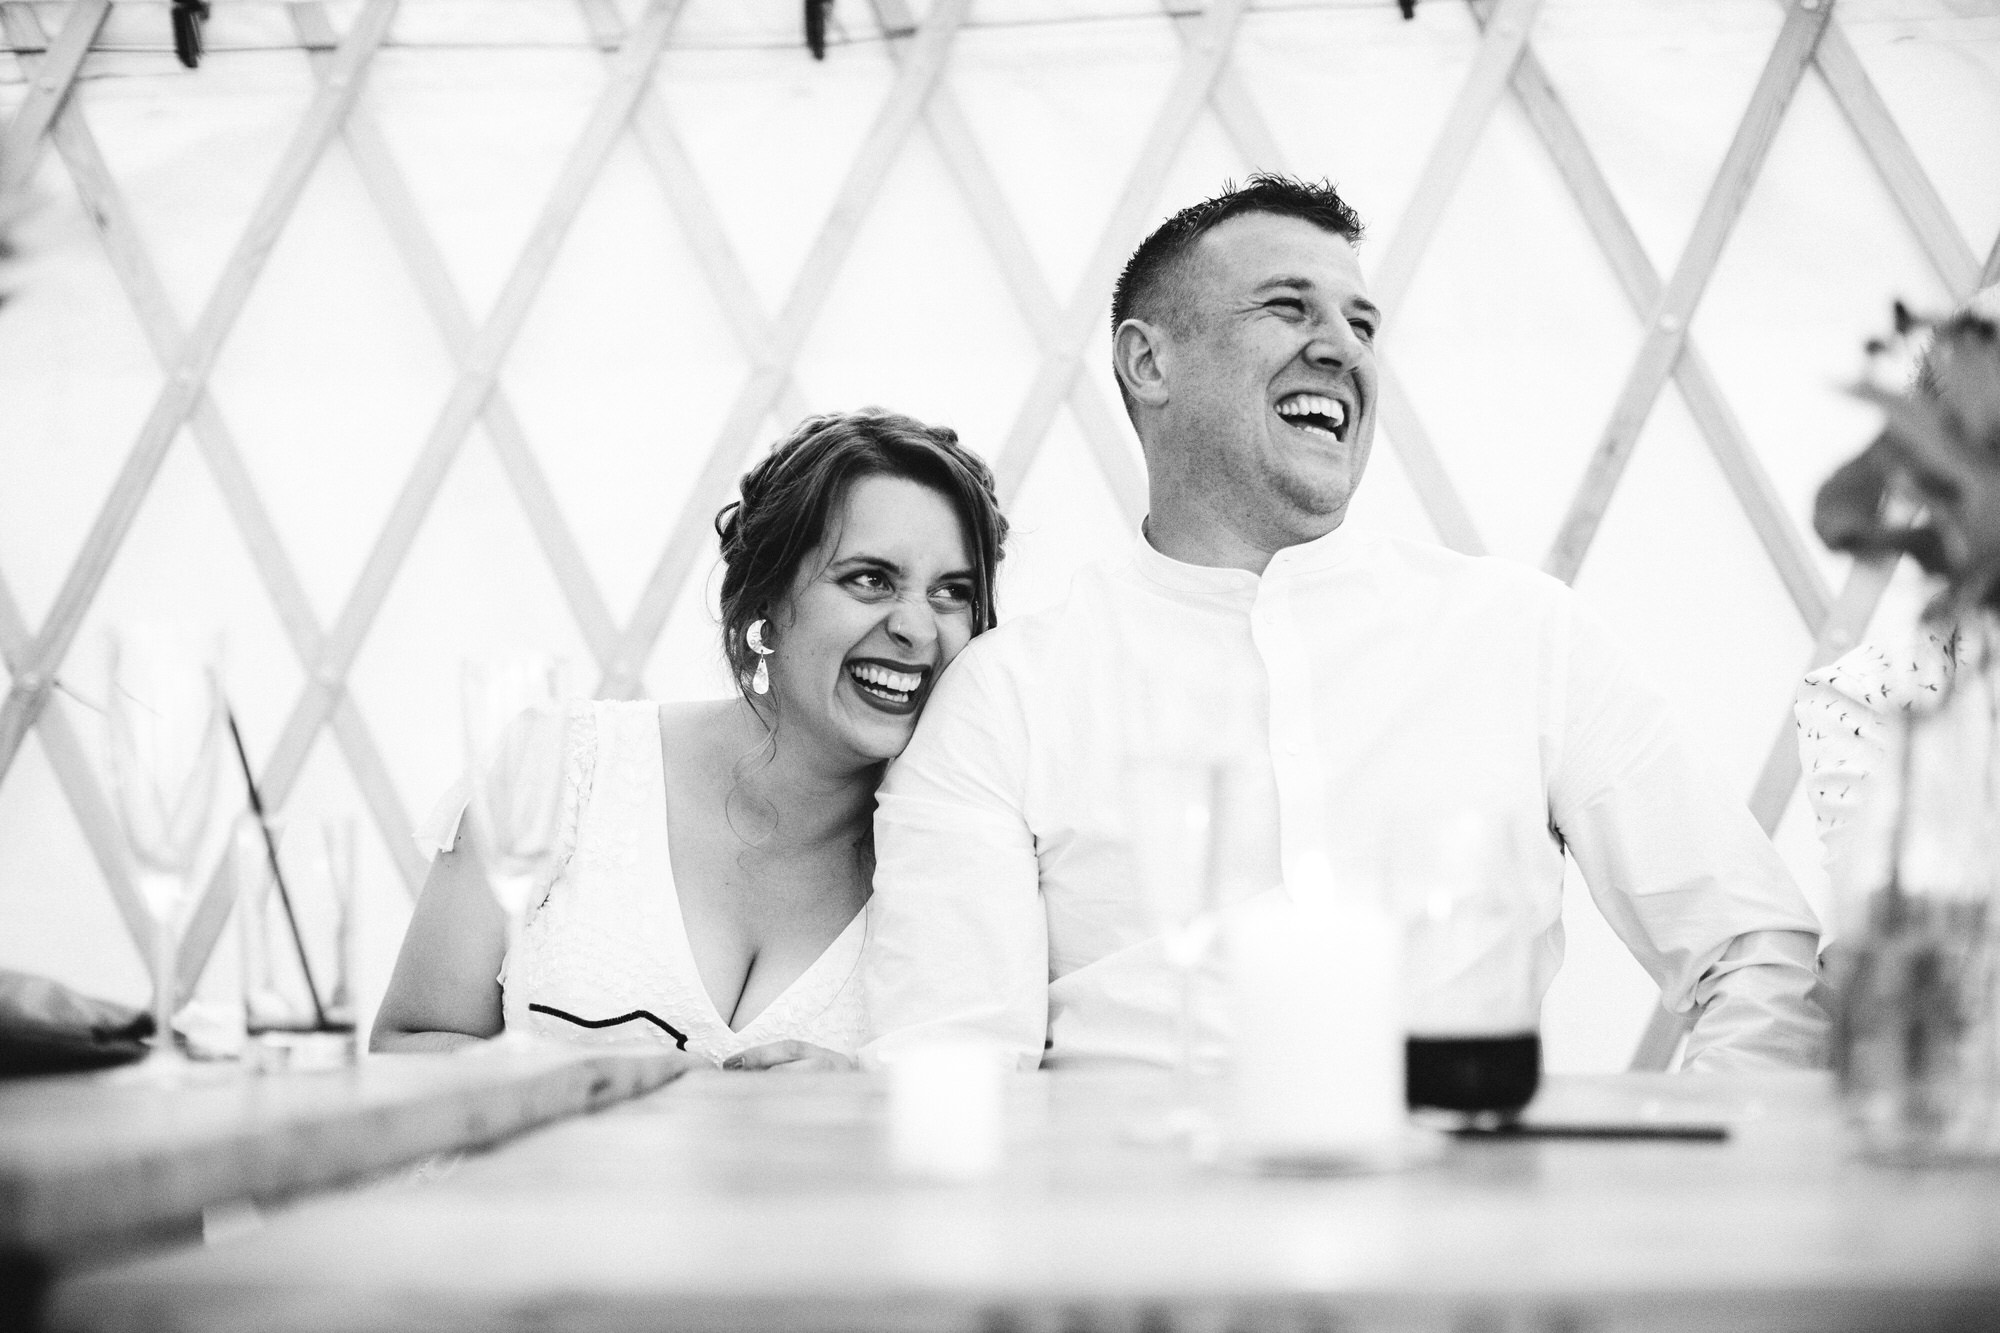 mono shot of couple laughing during speech together